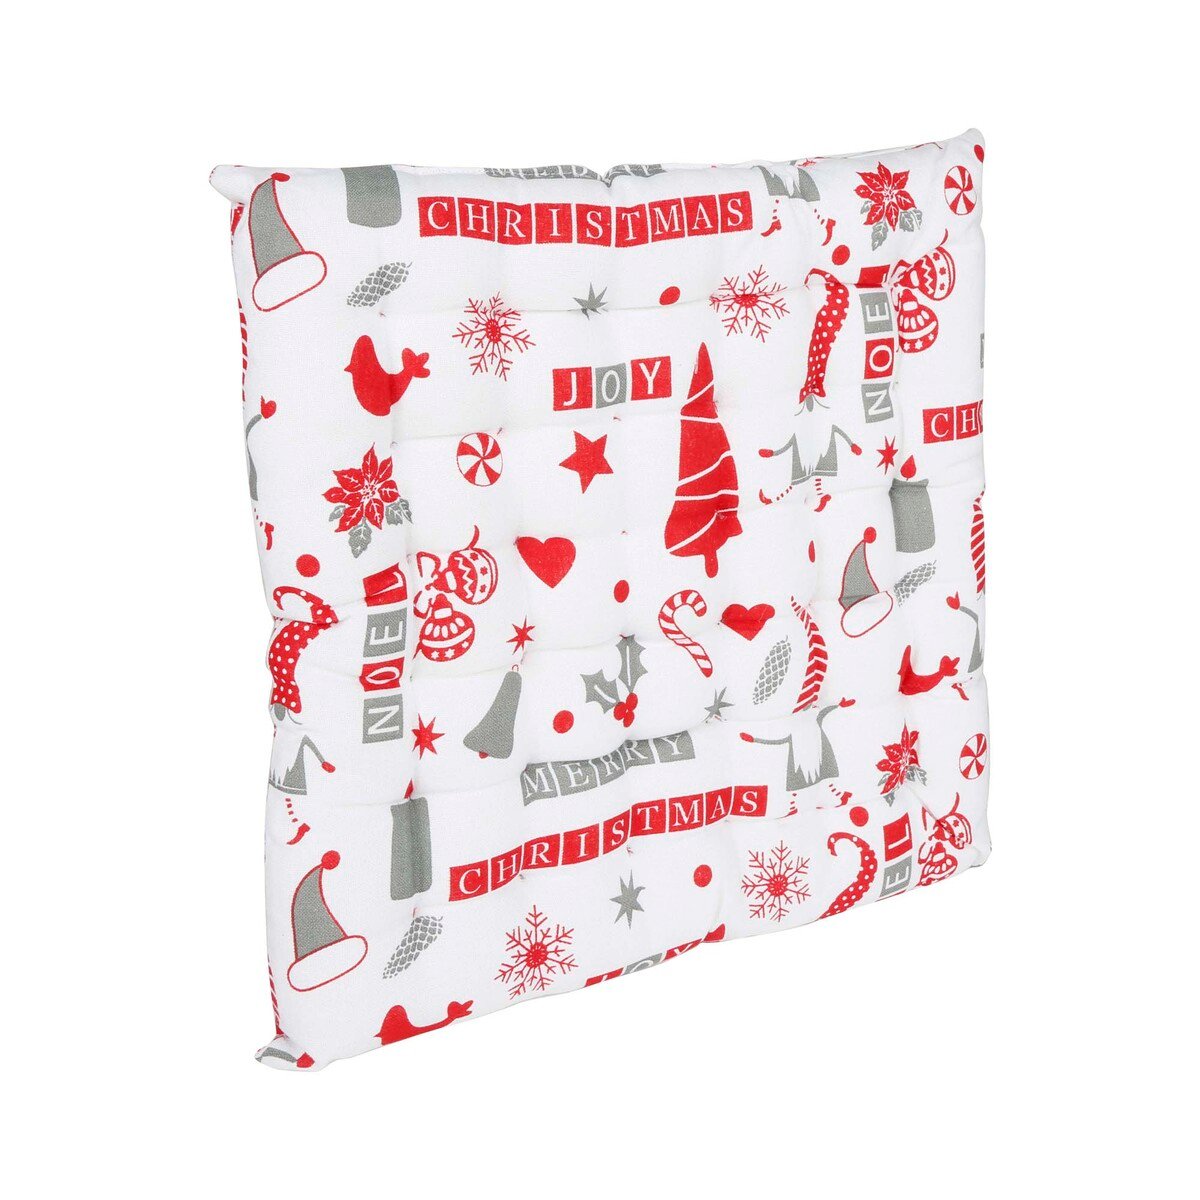 Homewell "Merry Christmas" Chair Pad 40x40cm Assorted